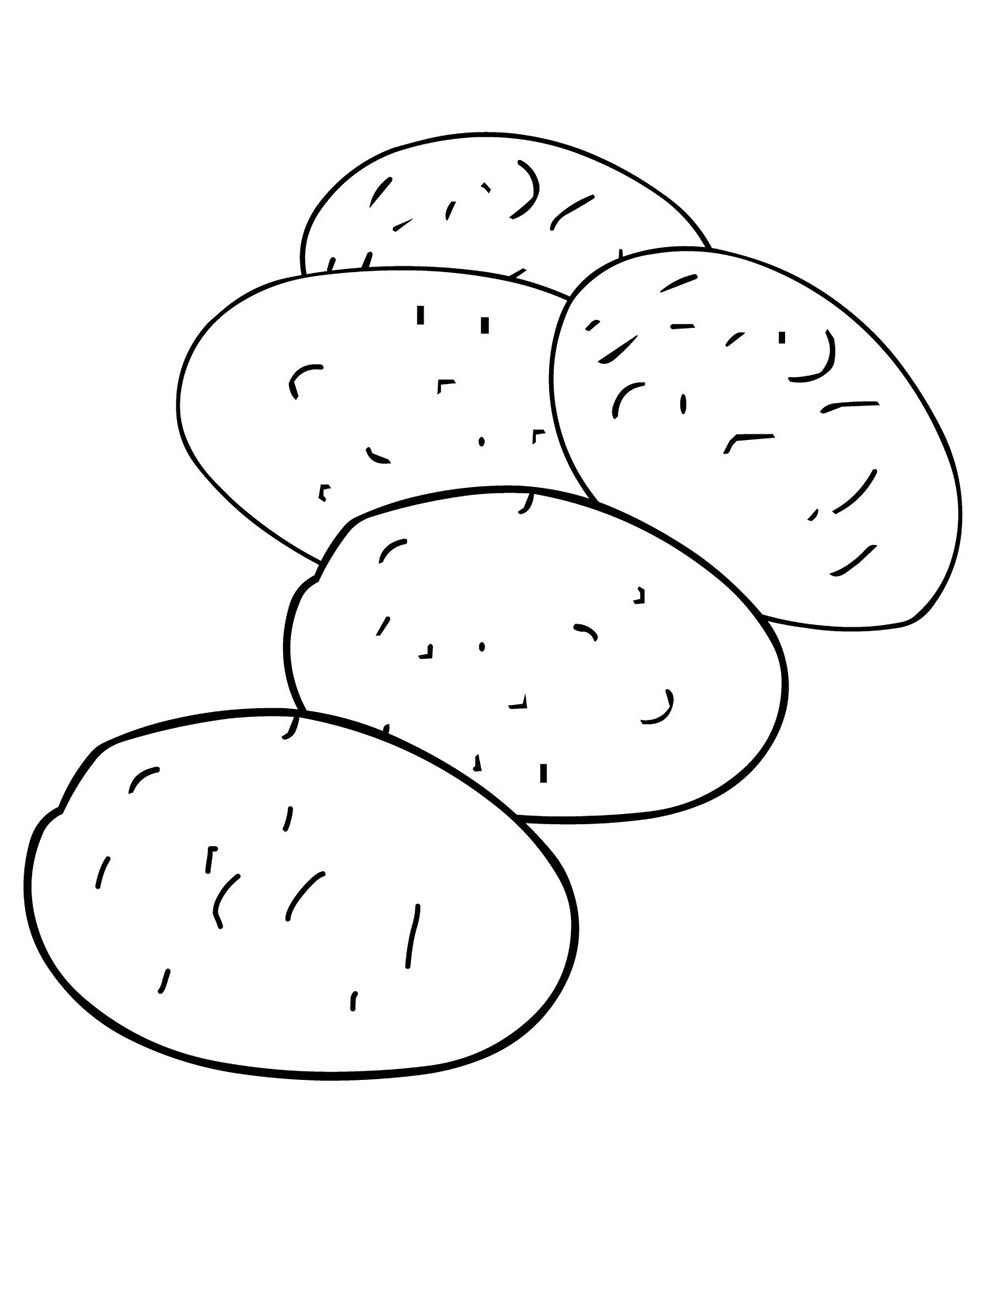 potato to color coloring pages of potato for preschoolers coloring potato color to 